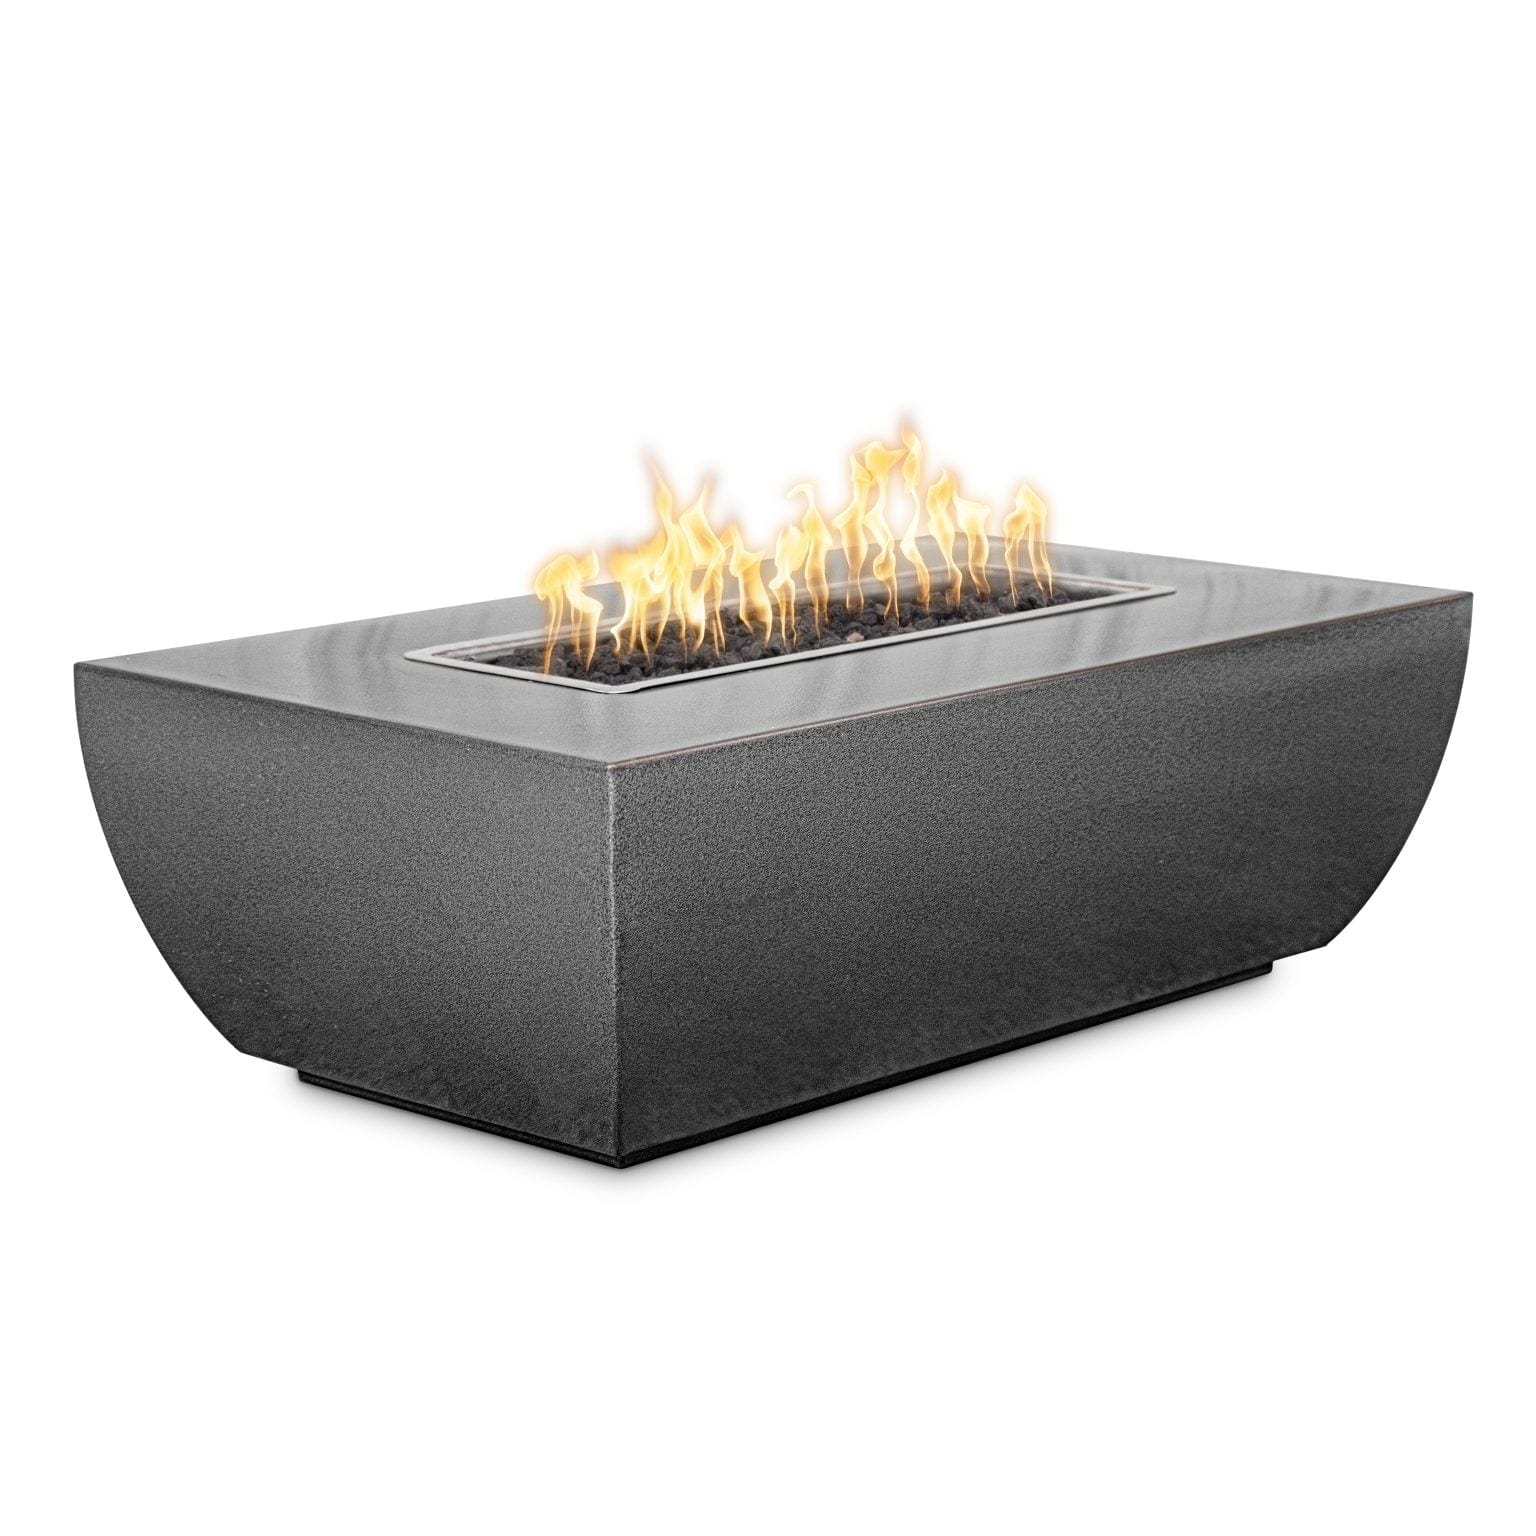 The Outdoor Plus Fire Pit 48" x 28" / Match Lit with Flame Sense System The Outdoor Plus Avalon 24" Tall Linear Fire Pit | Metal Powder Coat OPT-AVLPC4824FSML